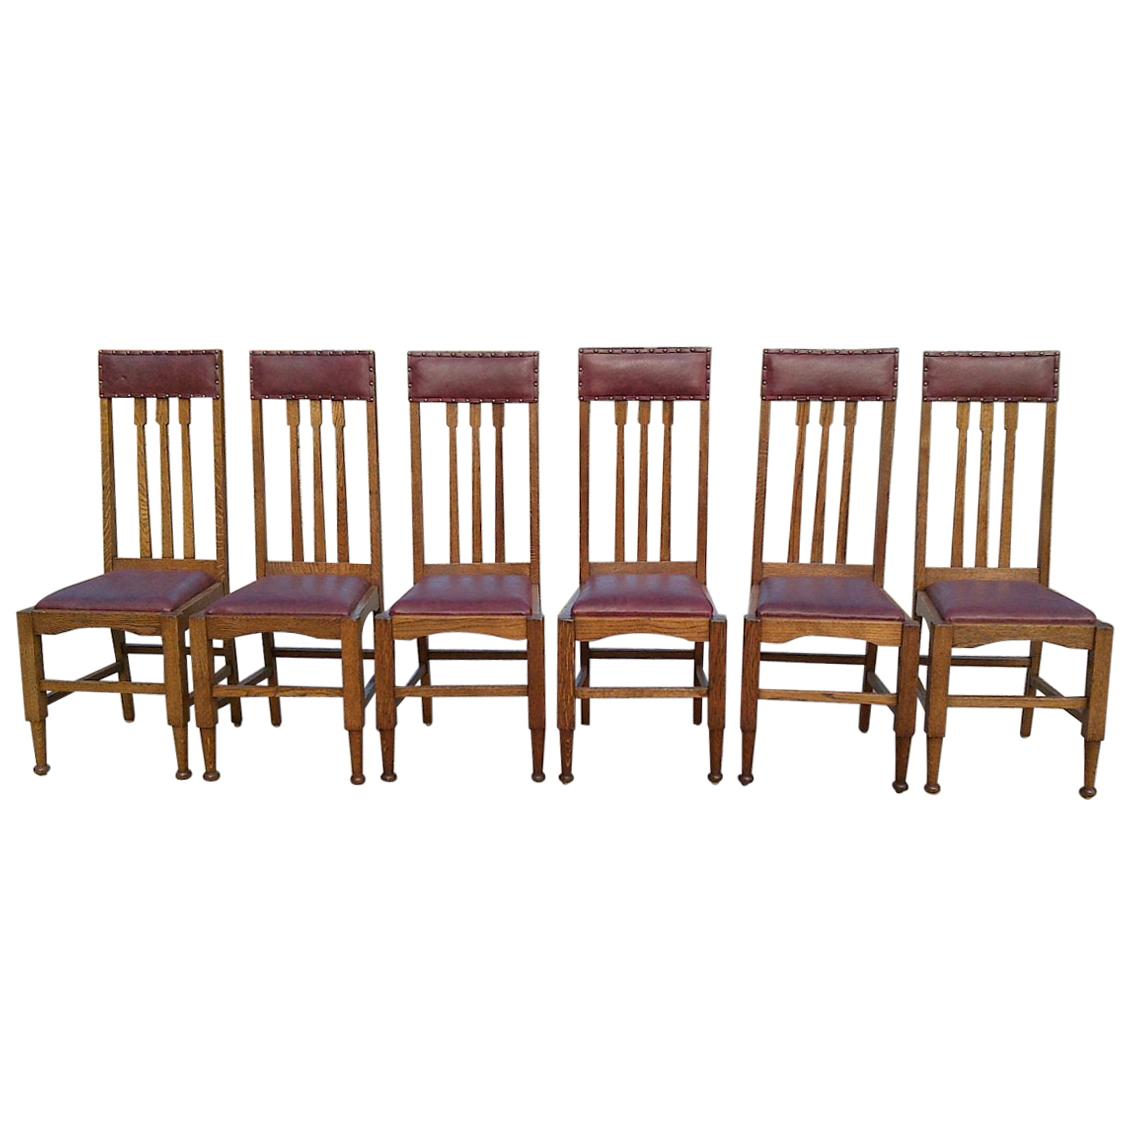 Eight Arts & Crafts Glasgow Style High Back Oak Dining Chairs with Leather Seats